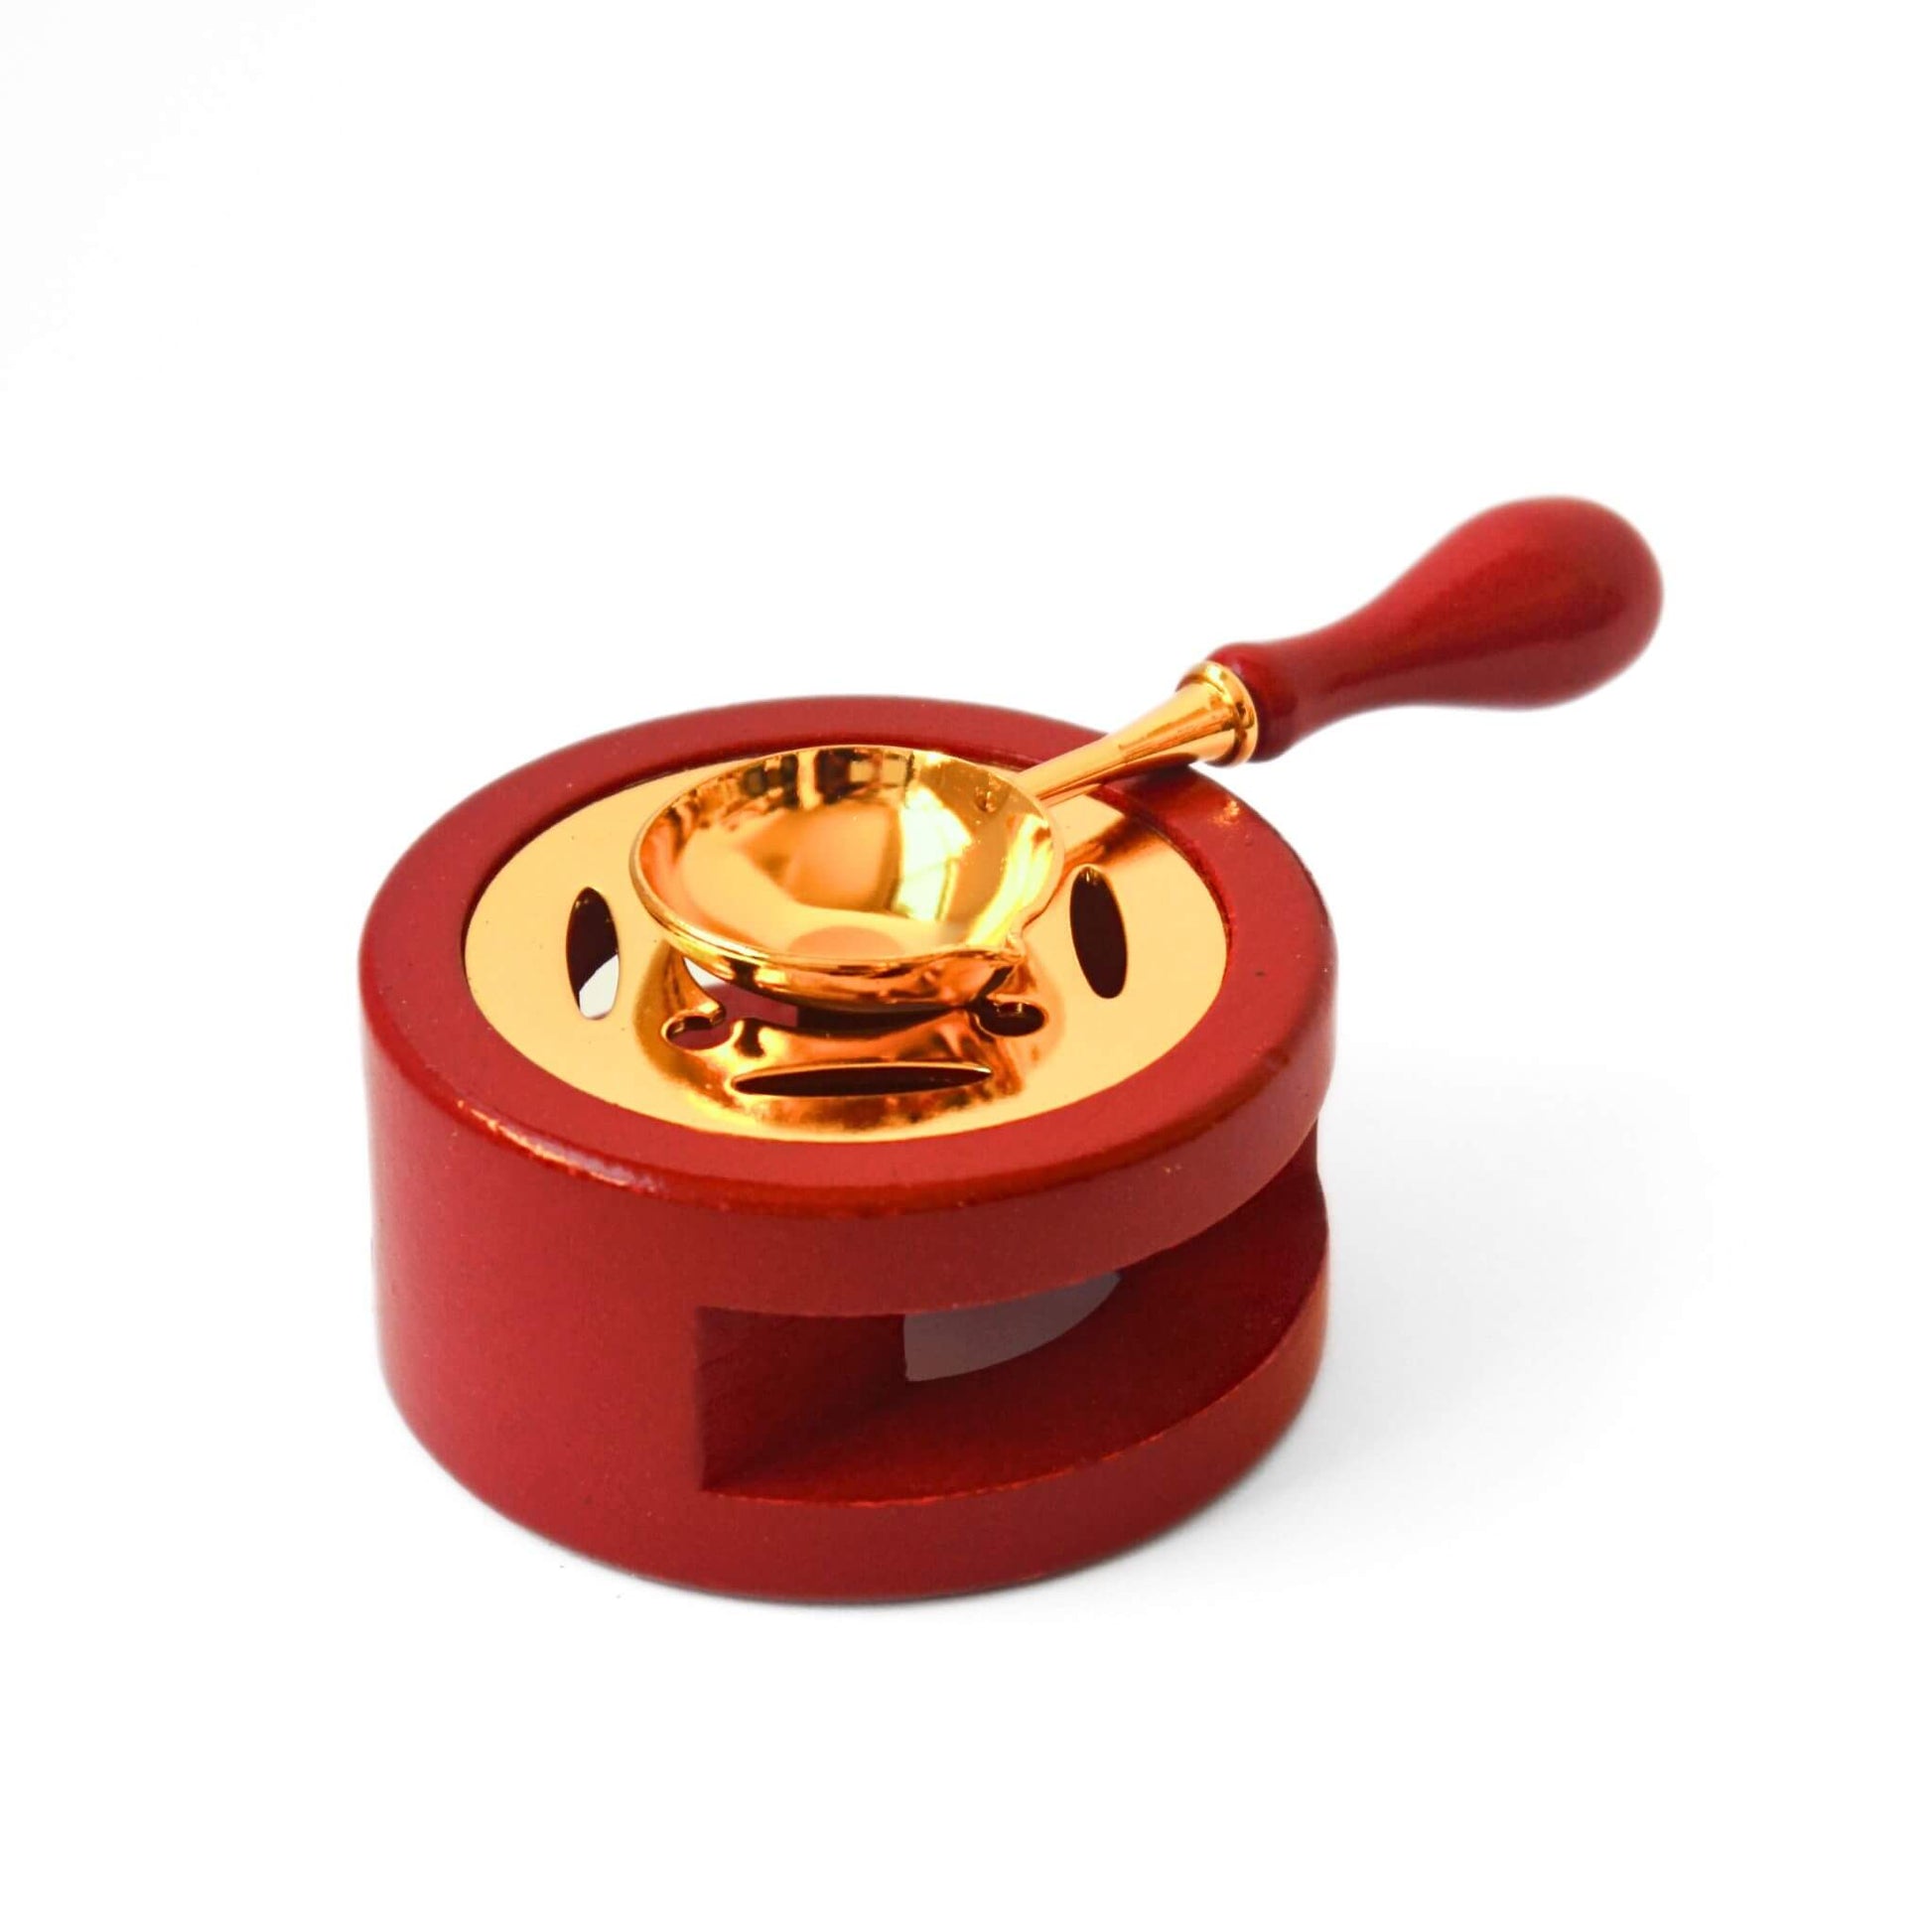 Bpunde terracotta and gold wax melting stove with spoon sitting on top